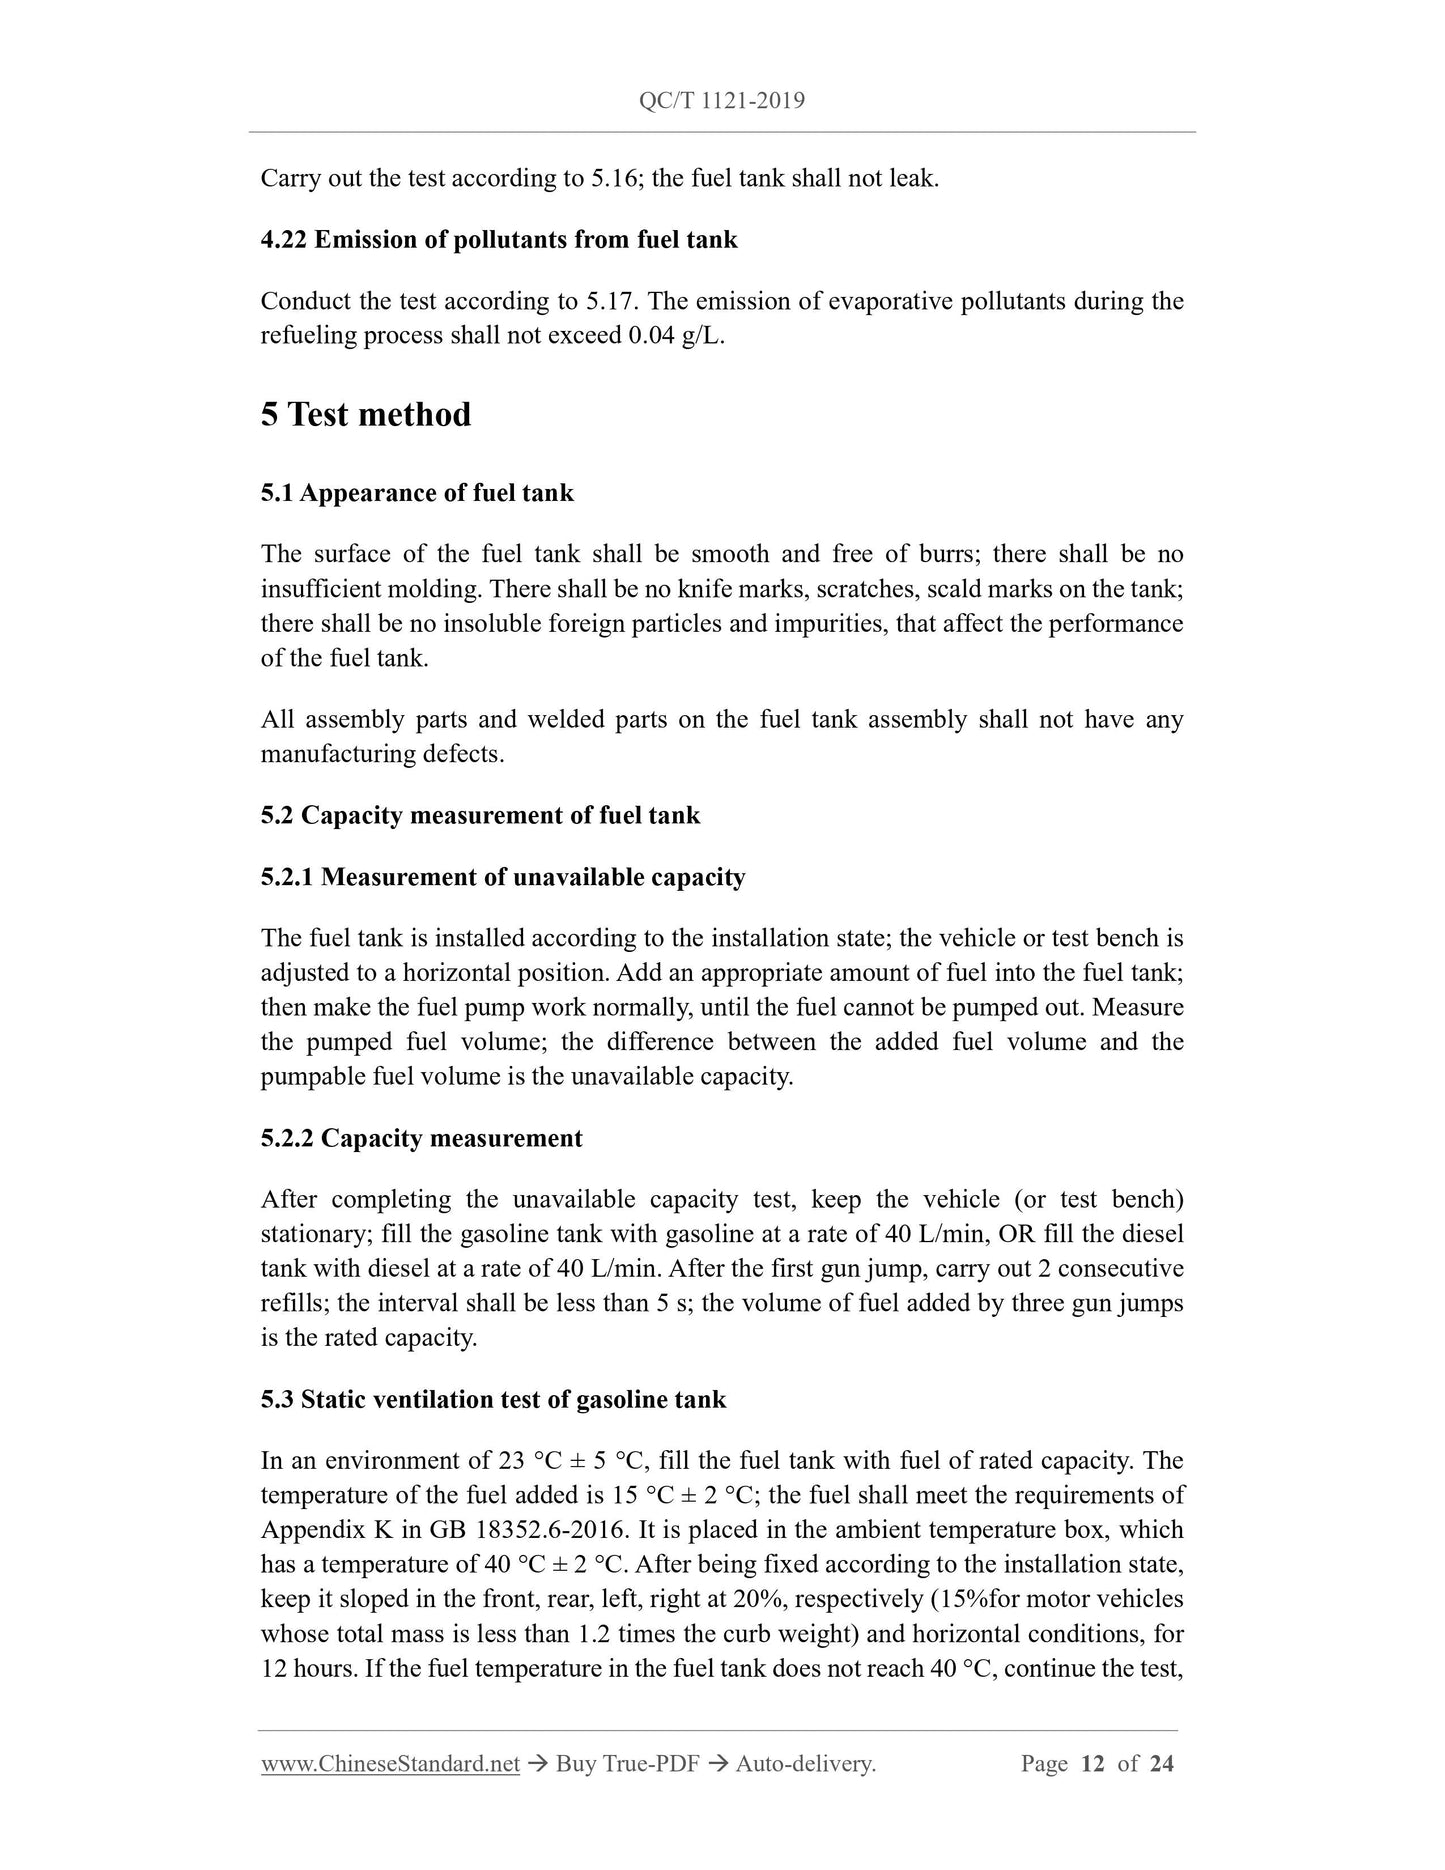 QC/T 1121-2019 Page 6